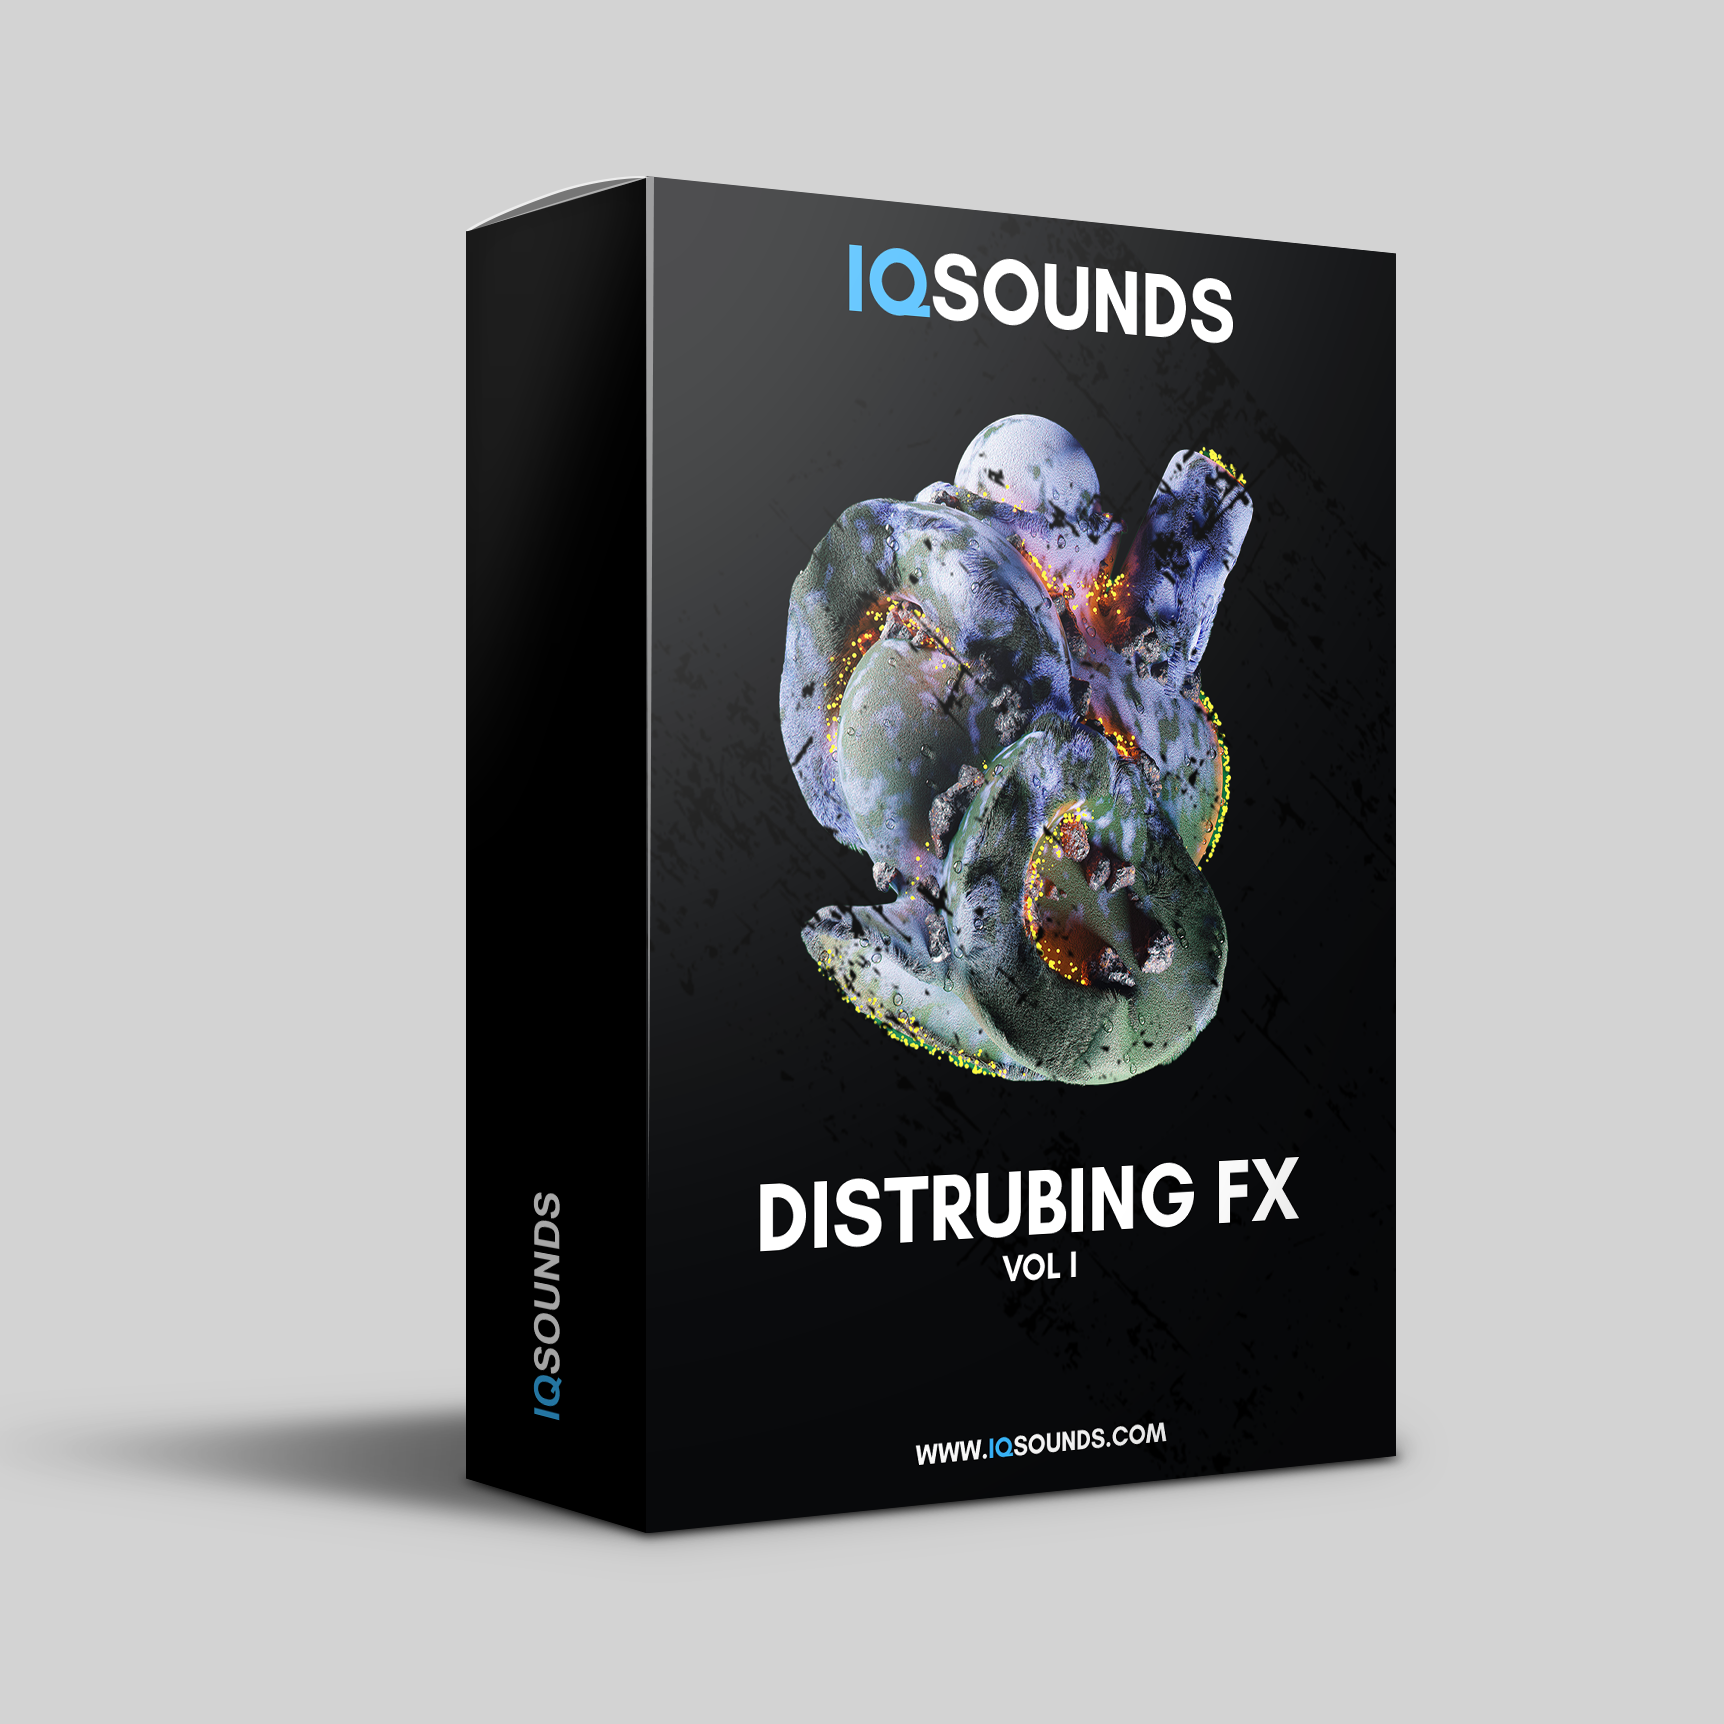 Sound Effects, FX One-Shots, Ambient Sounds, Professional Quality, Music Production, Sound Design, DAW, Music Producers, Audio Processing, Unique Sound Effects, High-Quality Samples, Disturbing FX vol I